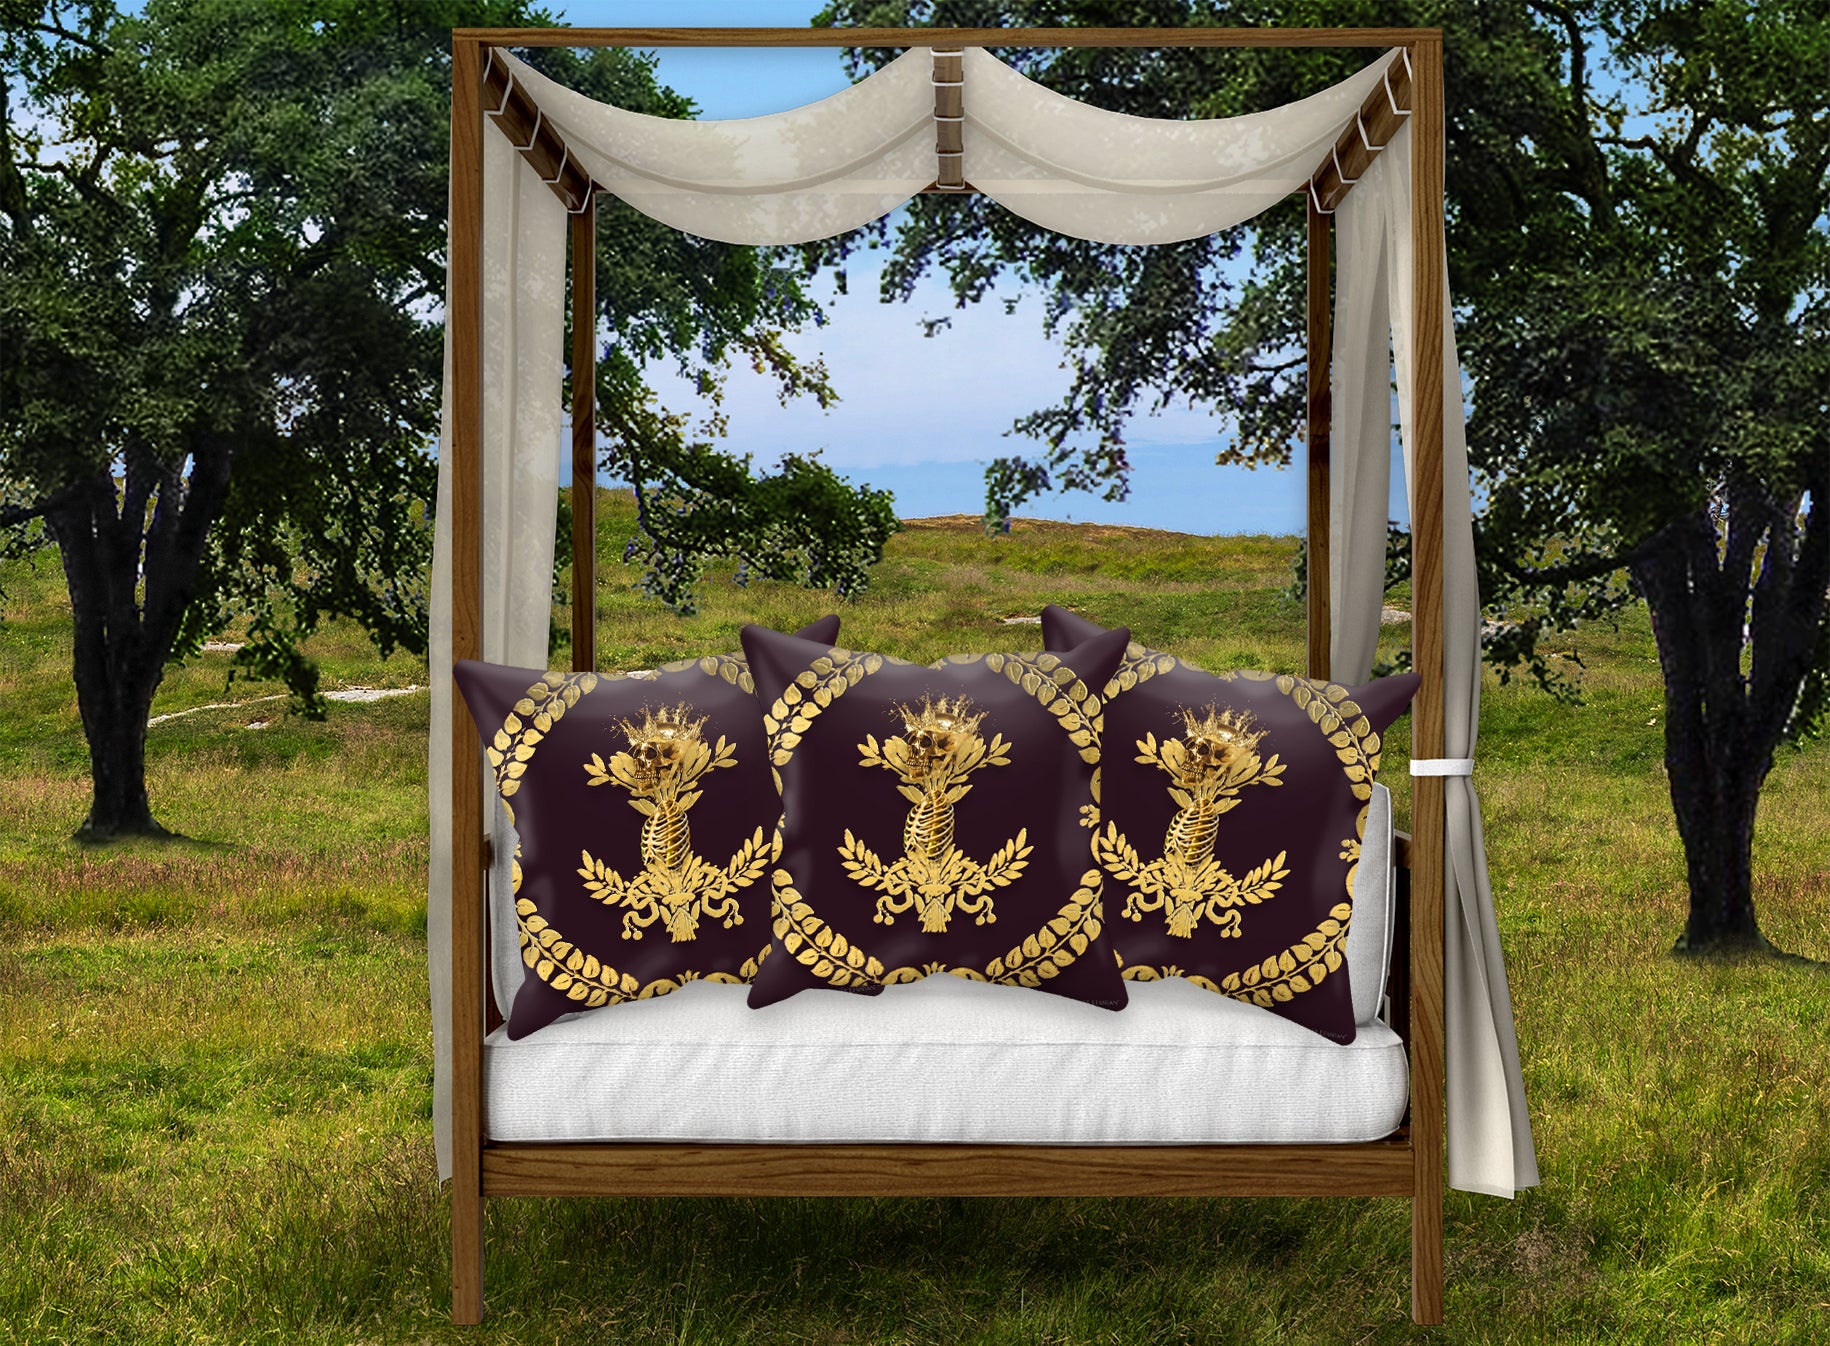 Caesar Skull Relief- Sets & Singles Pillowcase in Muted Eggplant Wine | Le Leanian™